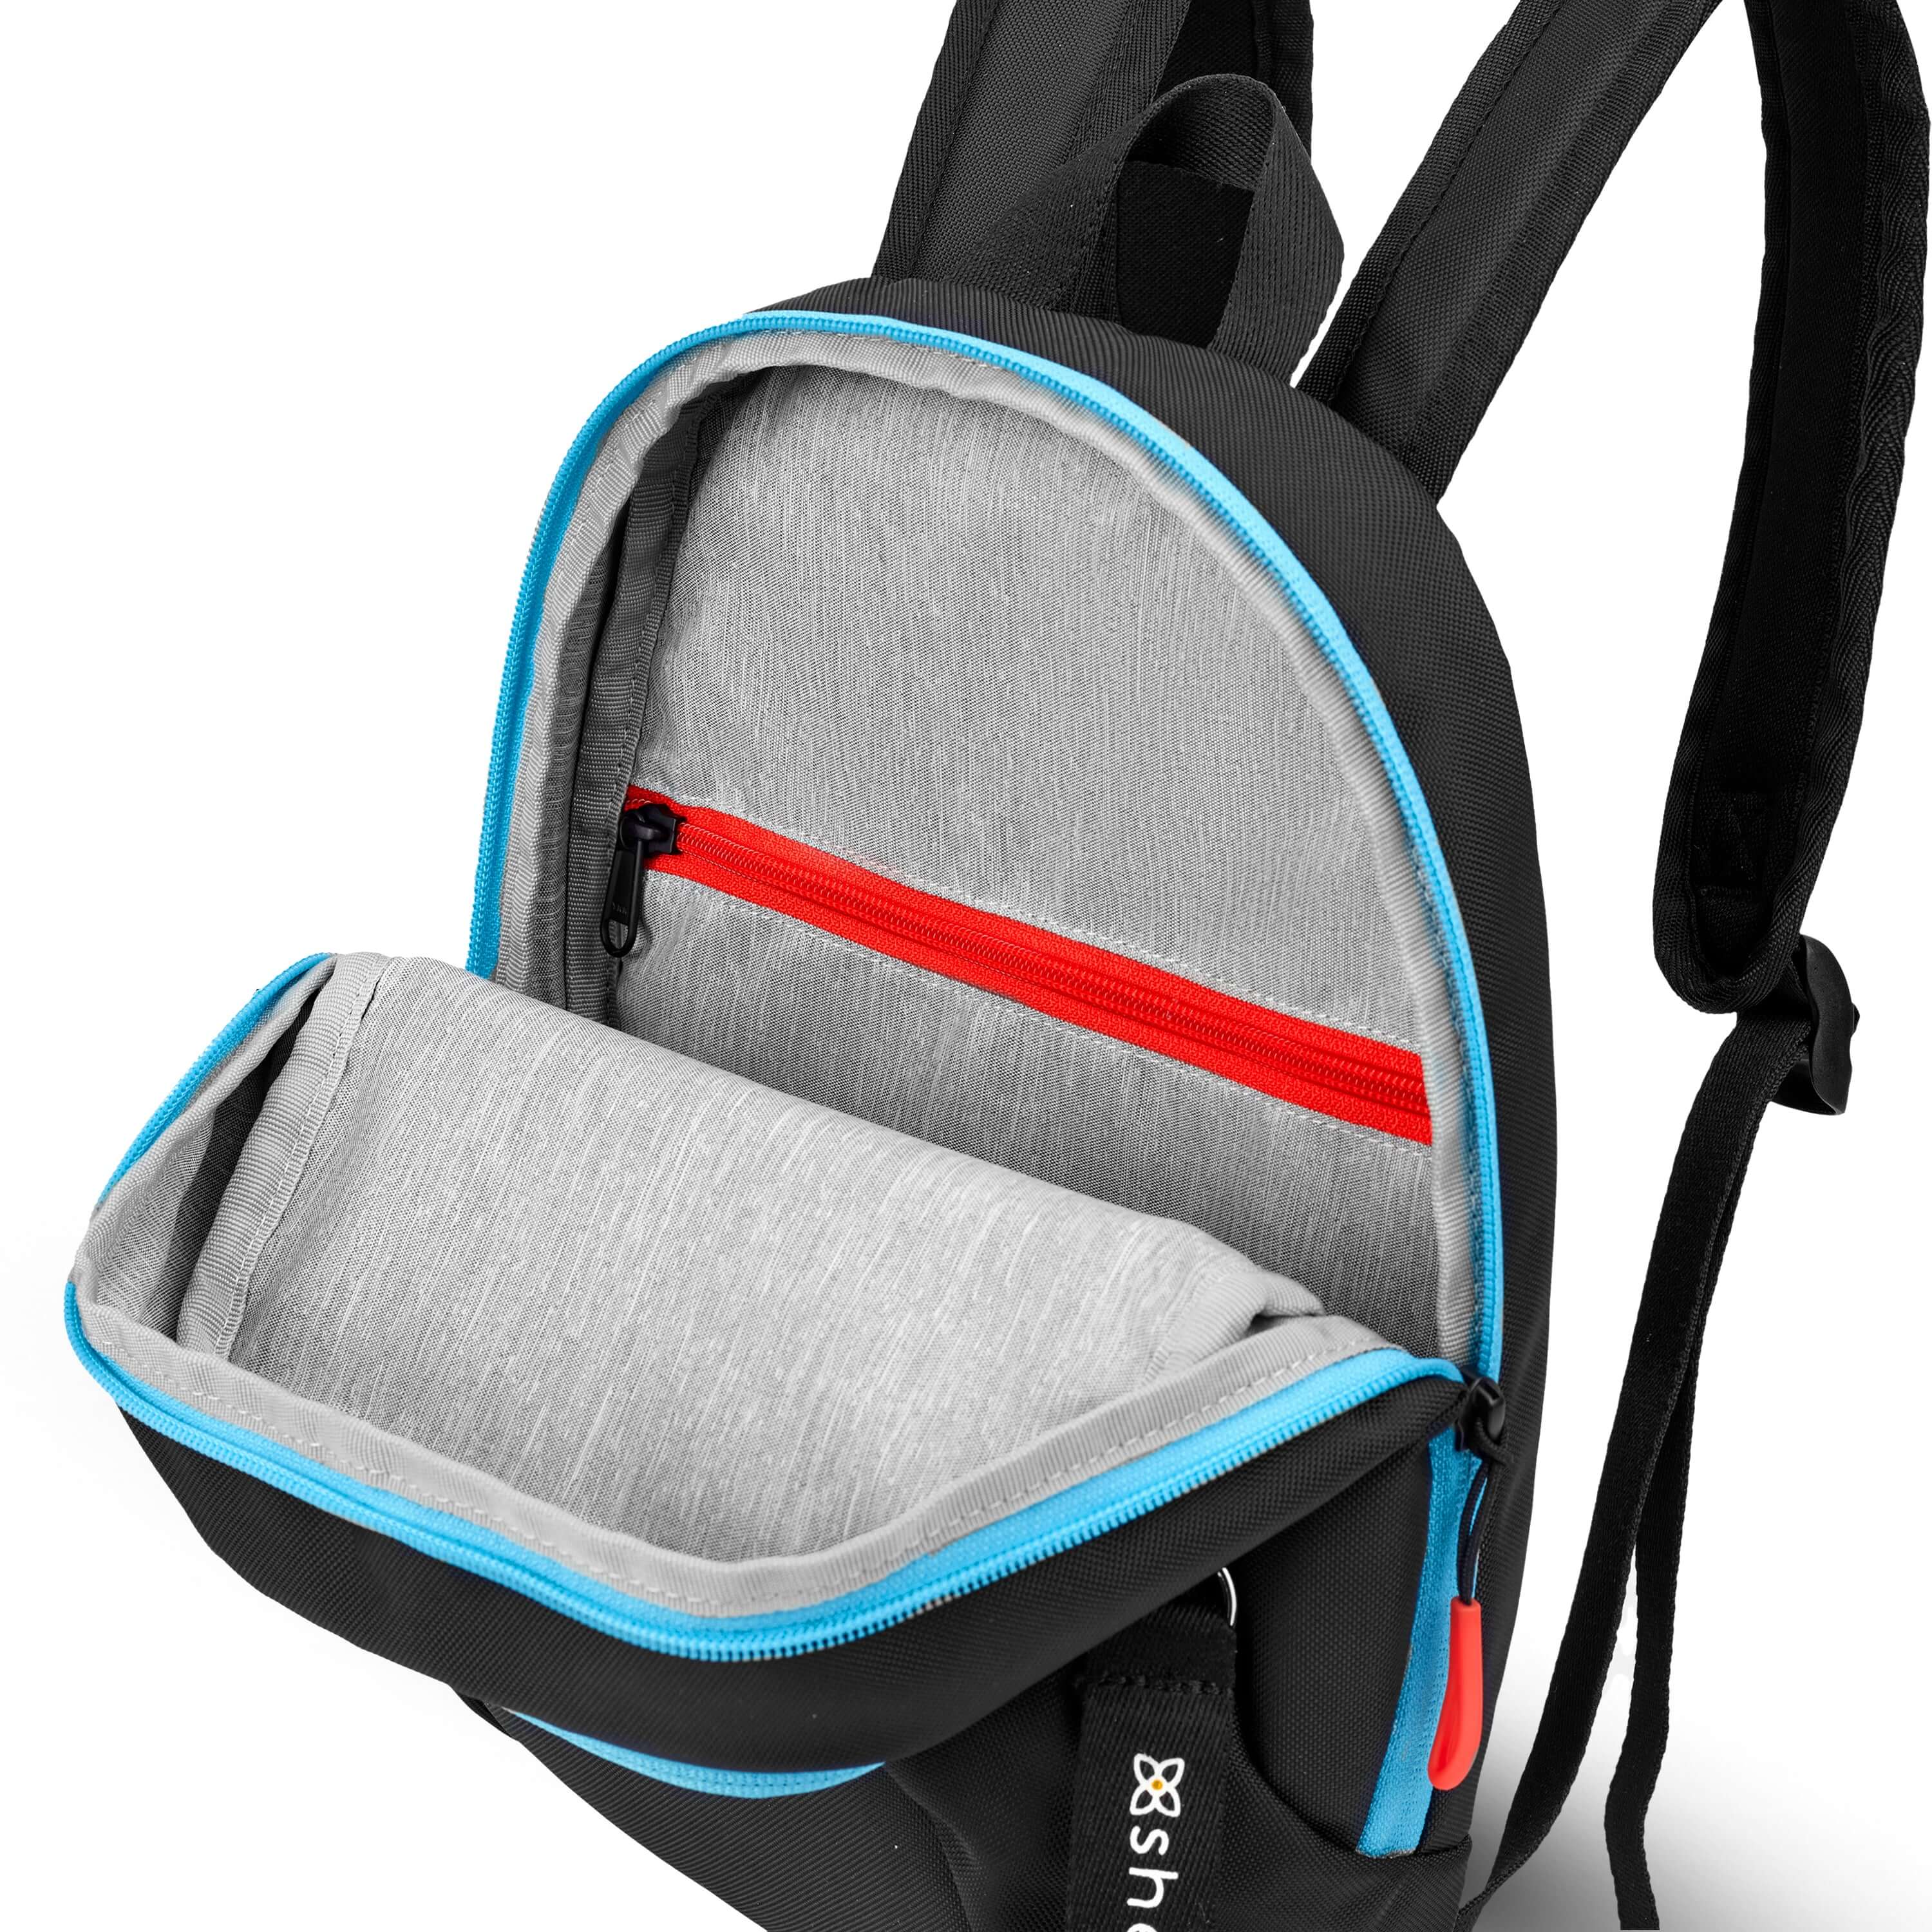 Top view of Sherpani mini backpack, the Vespa in Chromatic. The main zipper compartment is open to reveal a light gray interior and internal zipper pocket.